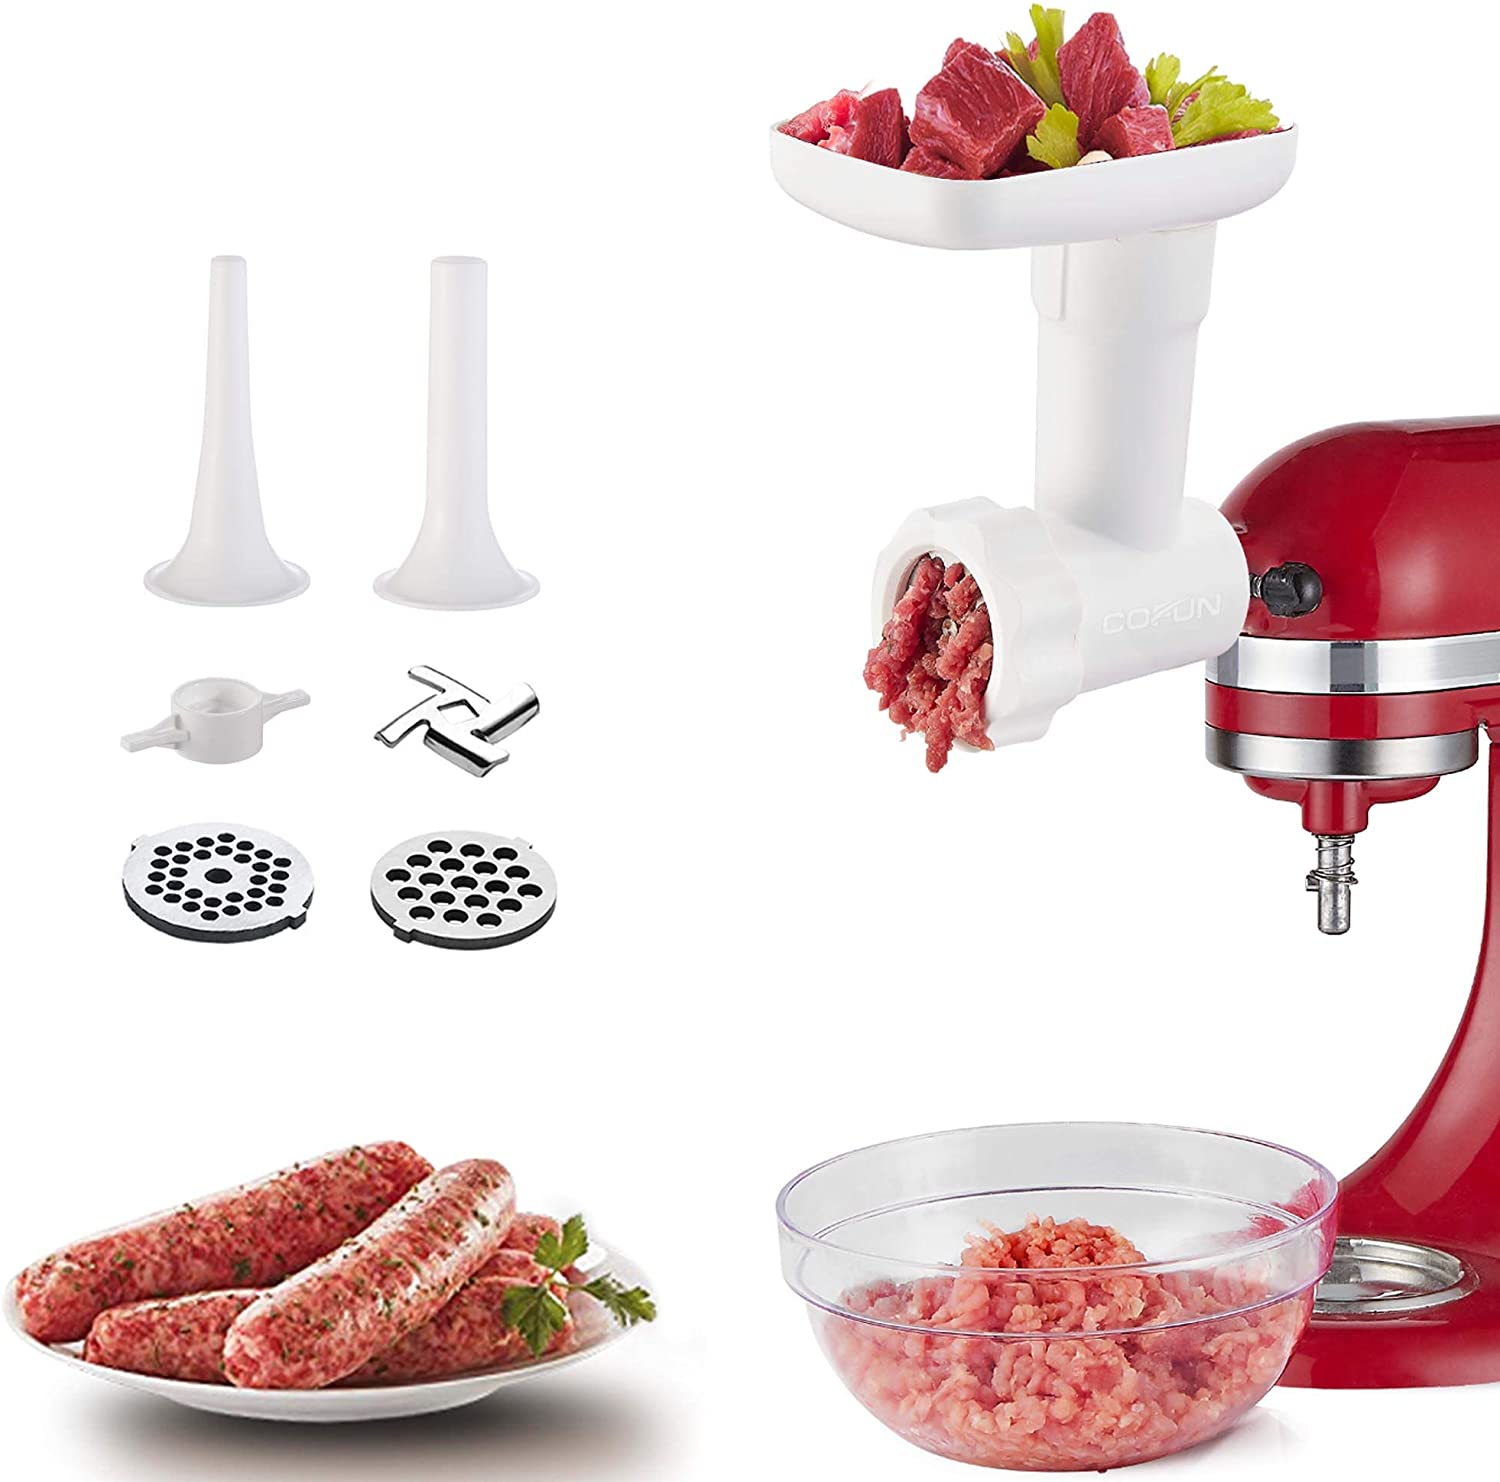 COFUN Meat Grinder Attachment for KitchenAid Food Processors, Meat Grinder for KitchenAid Accessories with Grinding Disc Sausage Filler Horns, Optional Accessories for KitchenAid Stand Mixer